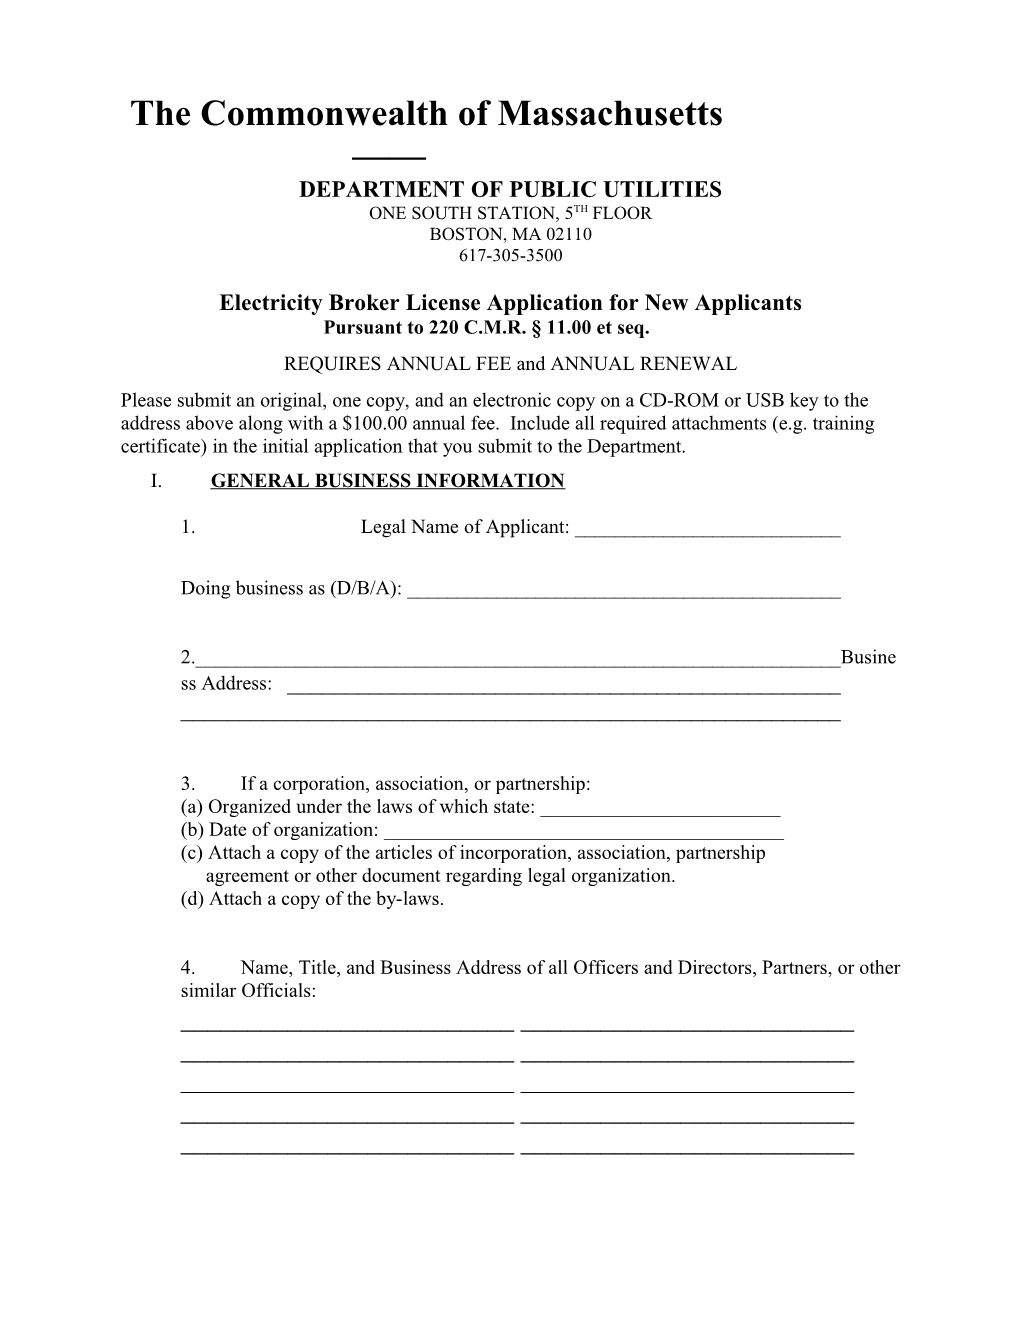 Electricity Broker License Application for New Applicants